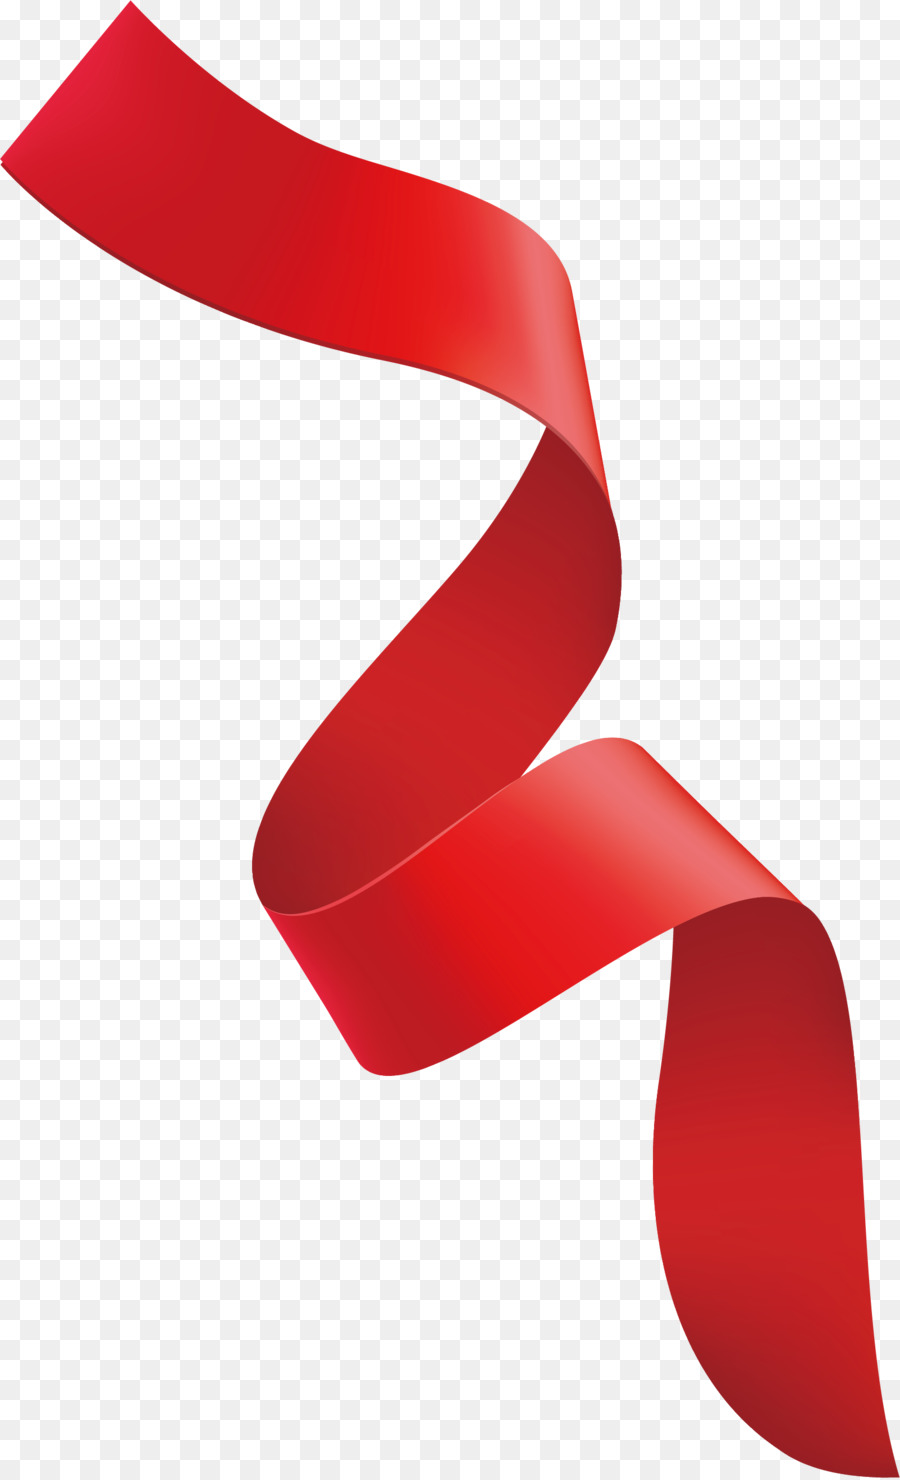 Red ribbon Red ribbon - Fine red curly ribbons png download - 1603*2632 - Free Transparent Ribbon png Download.